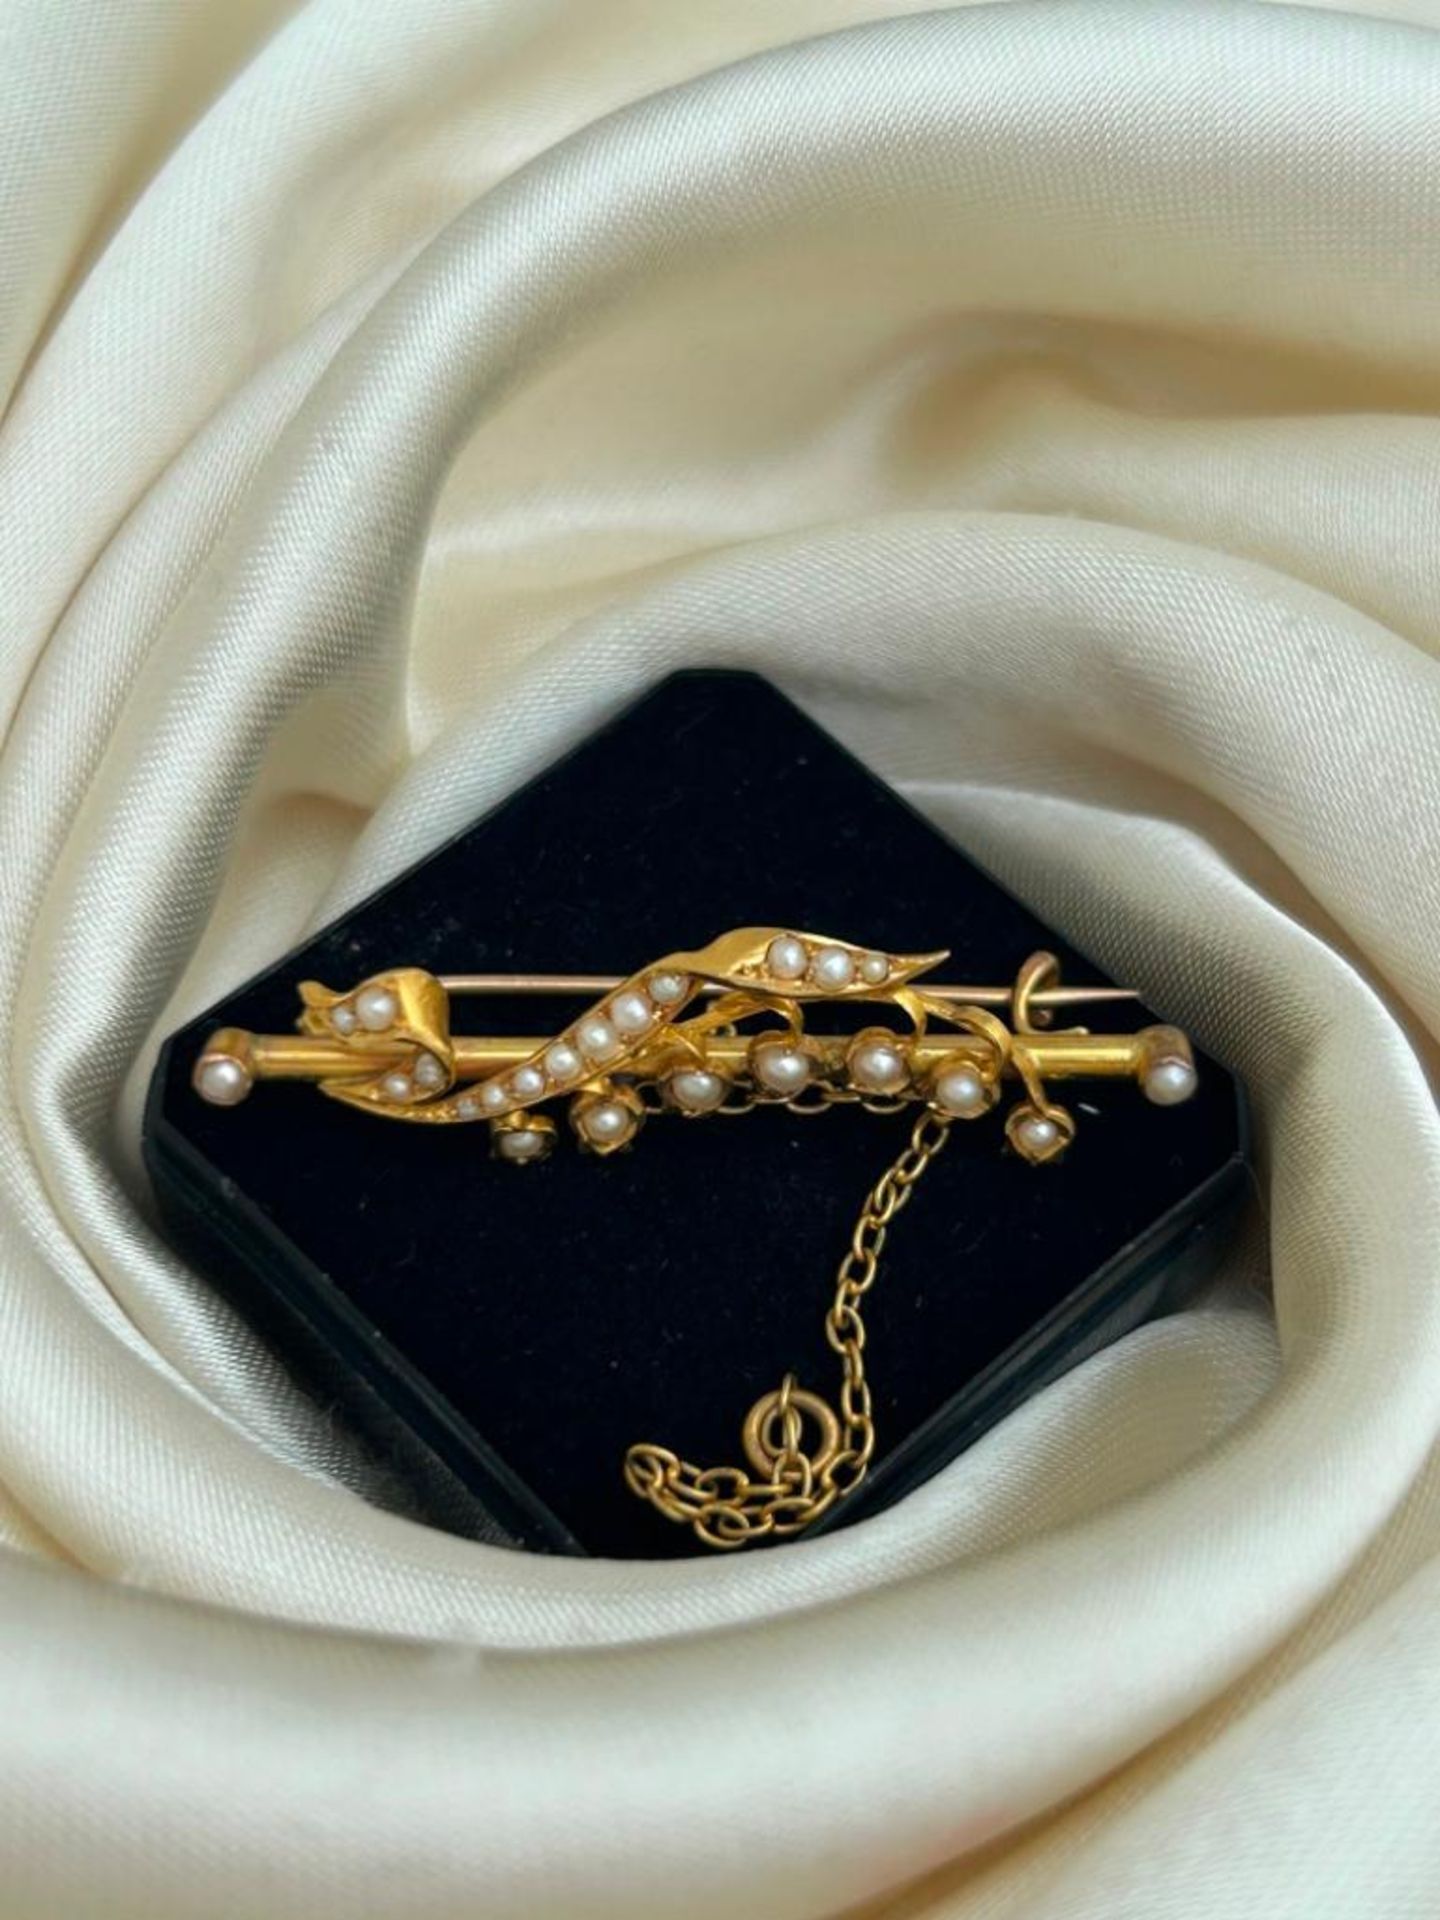 Amazing Antique 9ct Yellow Gold Pearl Lily of the Valley Brooch with Safety Chain - Image 4 of 5